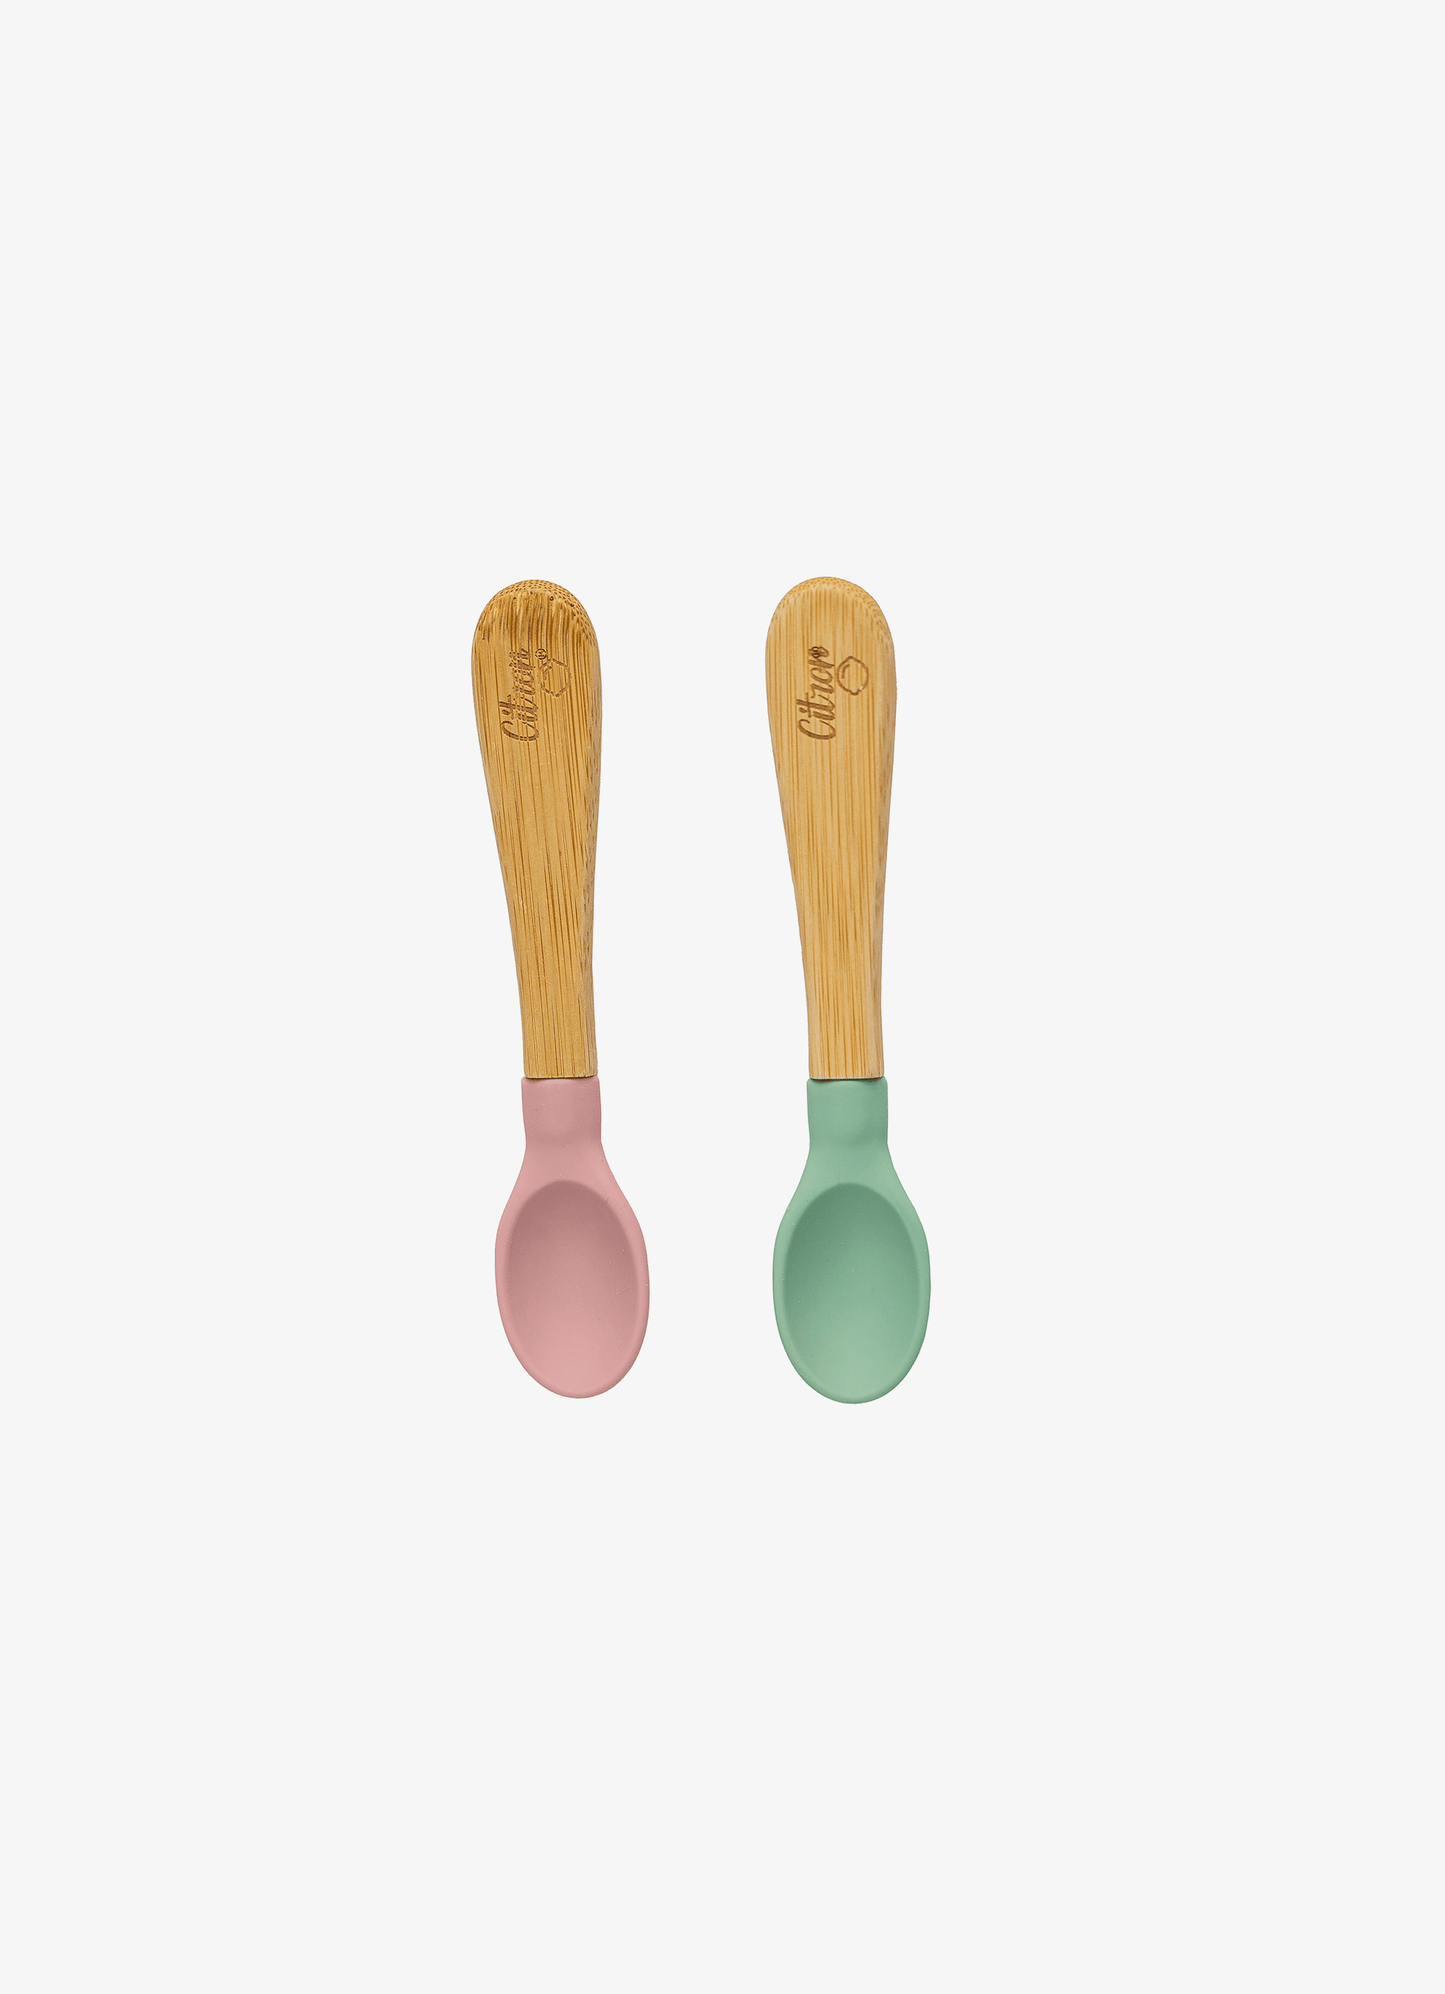 Bamboo Spoon Set - 2 piece - Green and Blush Pink